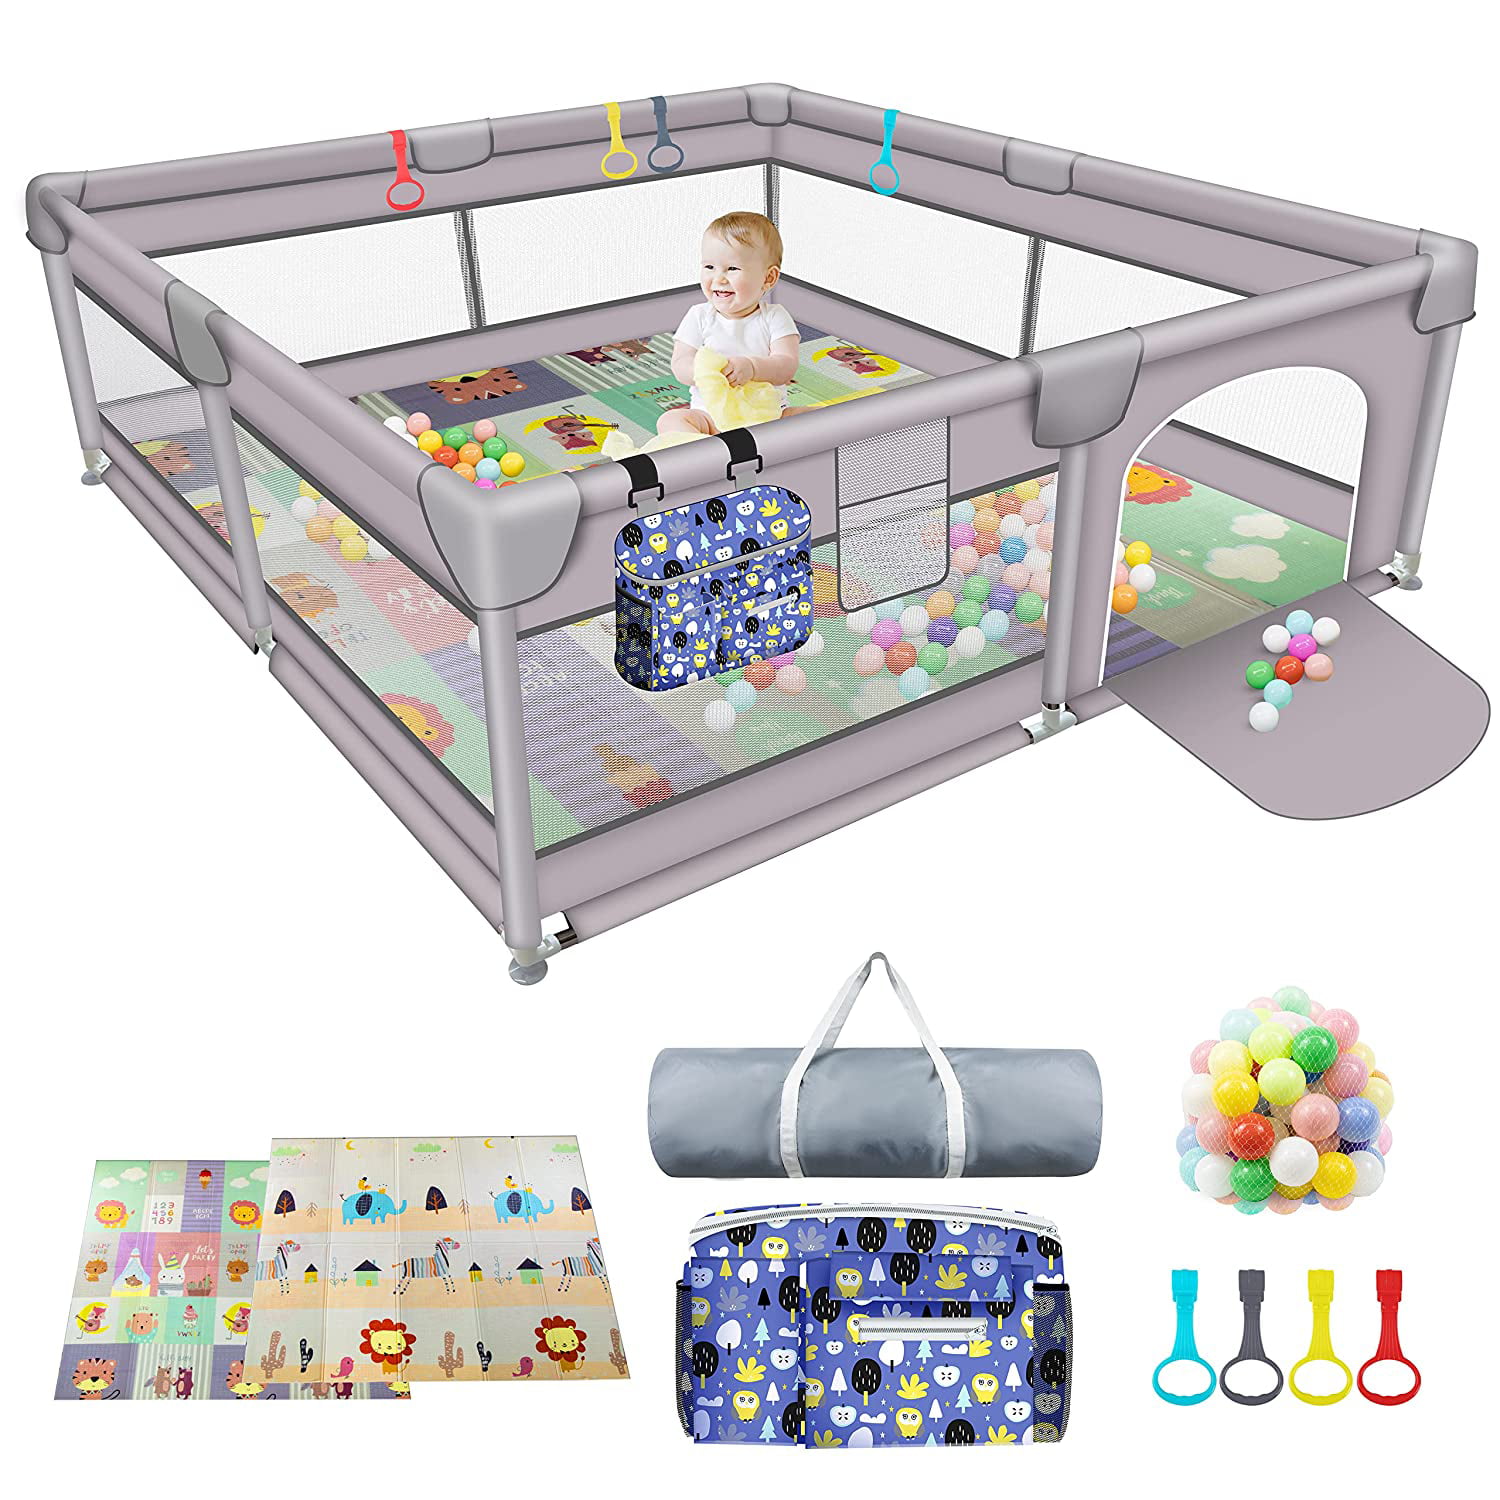 Light Gray, Large Sturdy Safety Playpen with Anti-Slip Suckers and Super Soft Breathable Mesh Baby Playpen Extra Large Playyard for Toddler,Portable Kids Activity Center for Indoor and Outdoor 